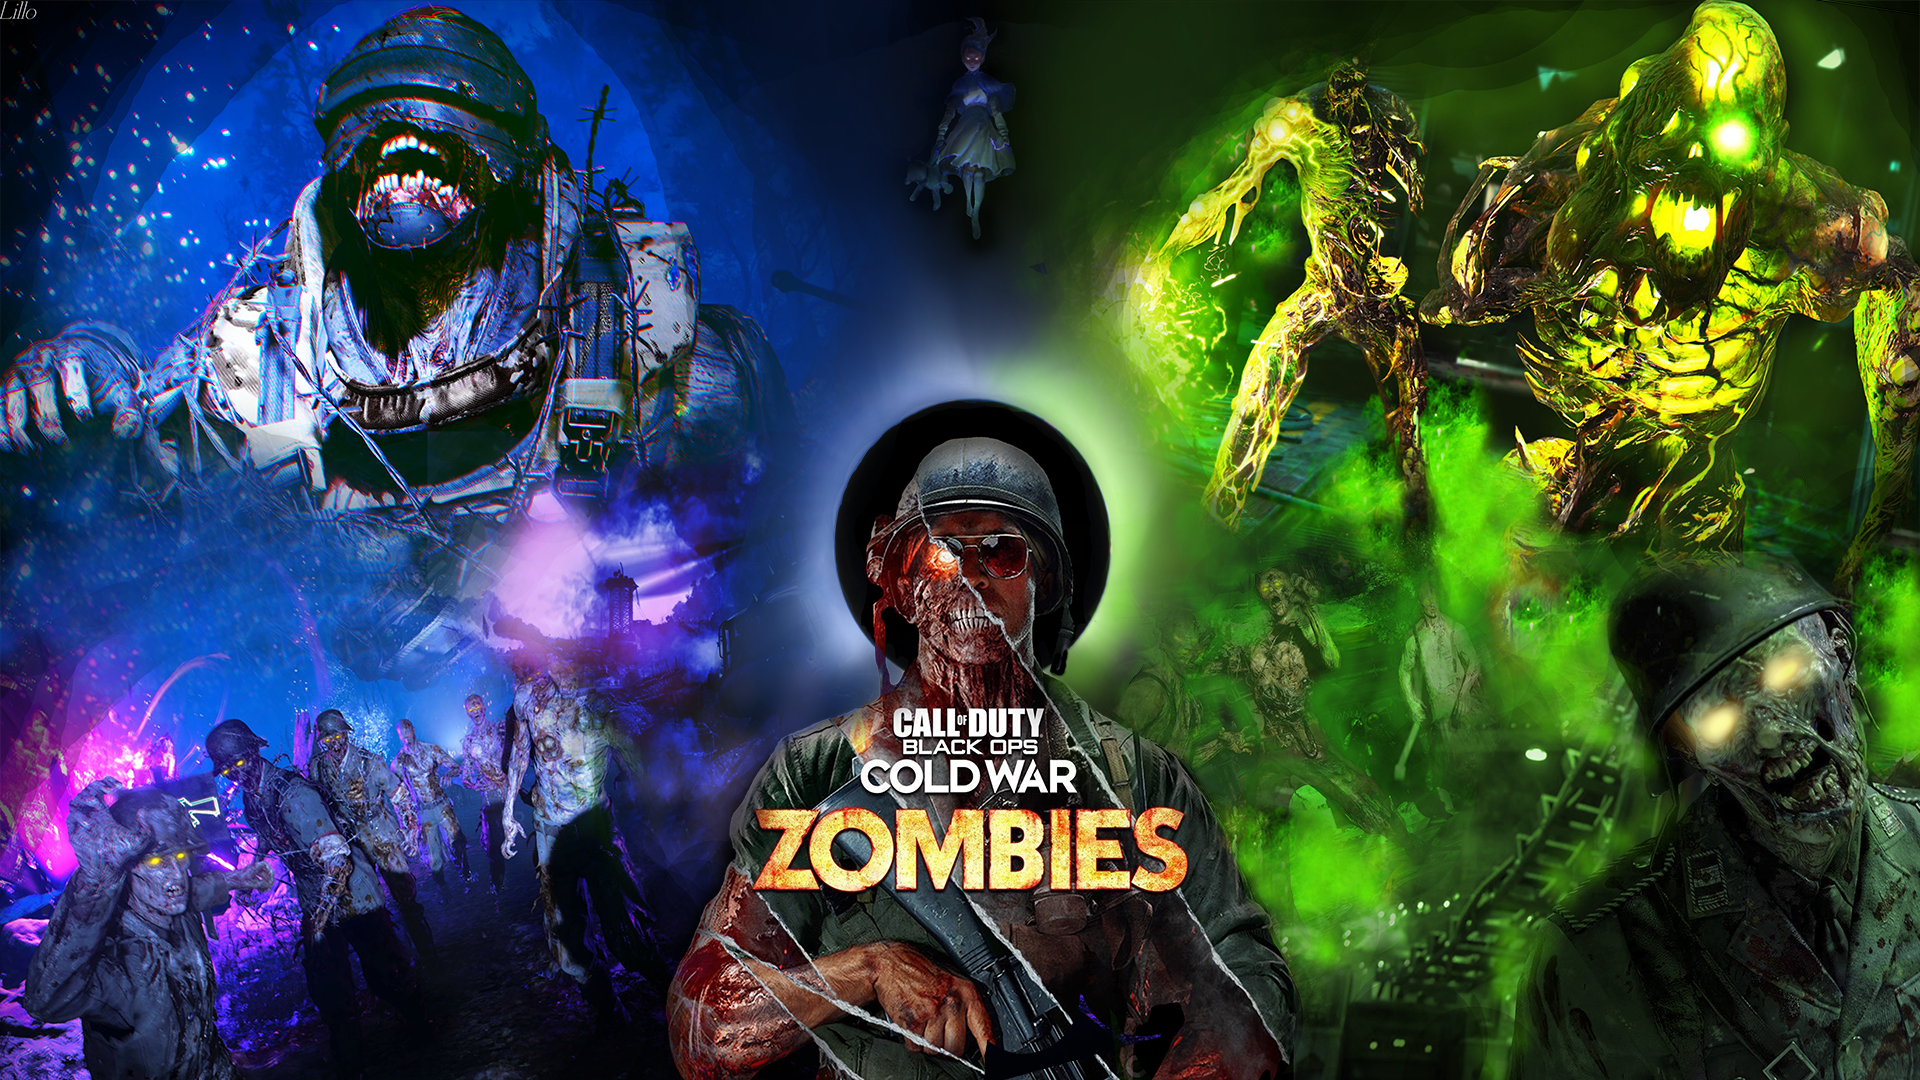 General 1920x1080 video games PC gaming collage zombies undead call of duty: Black Ops Cold War Zombies